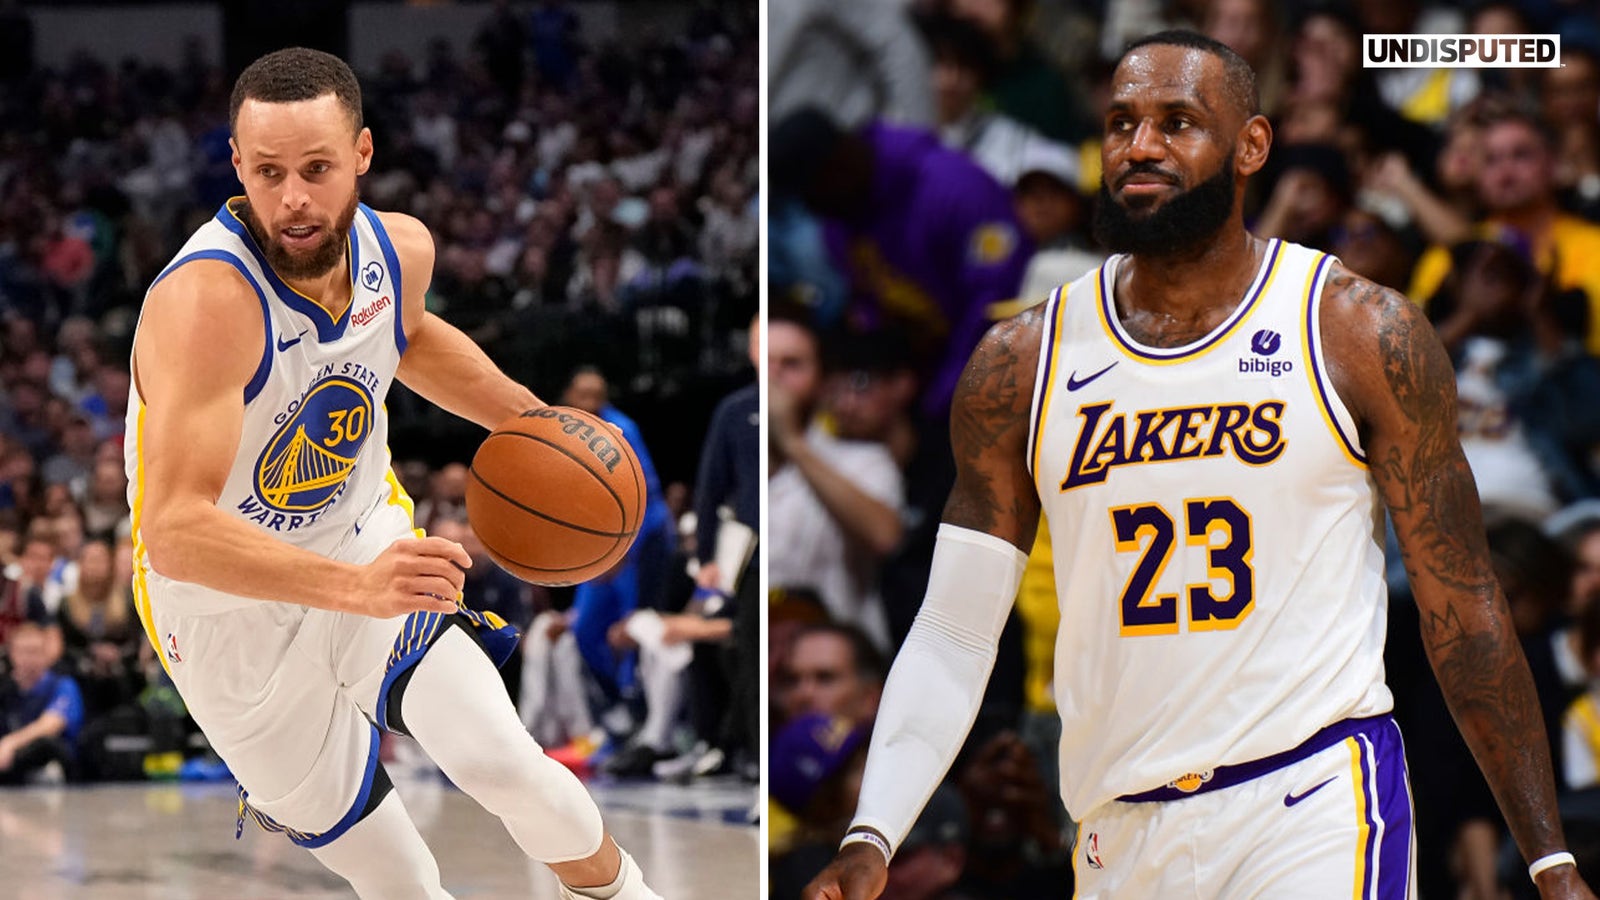 Lakers host Warriors in crucial game with play-in seeding on the line 